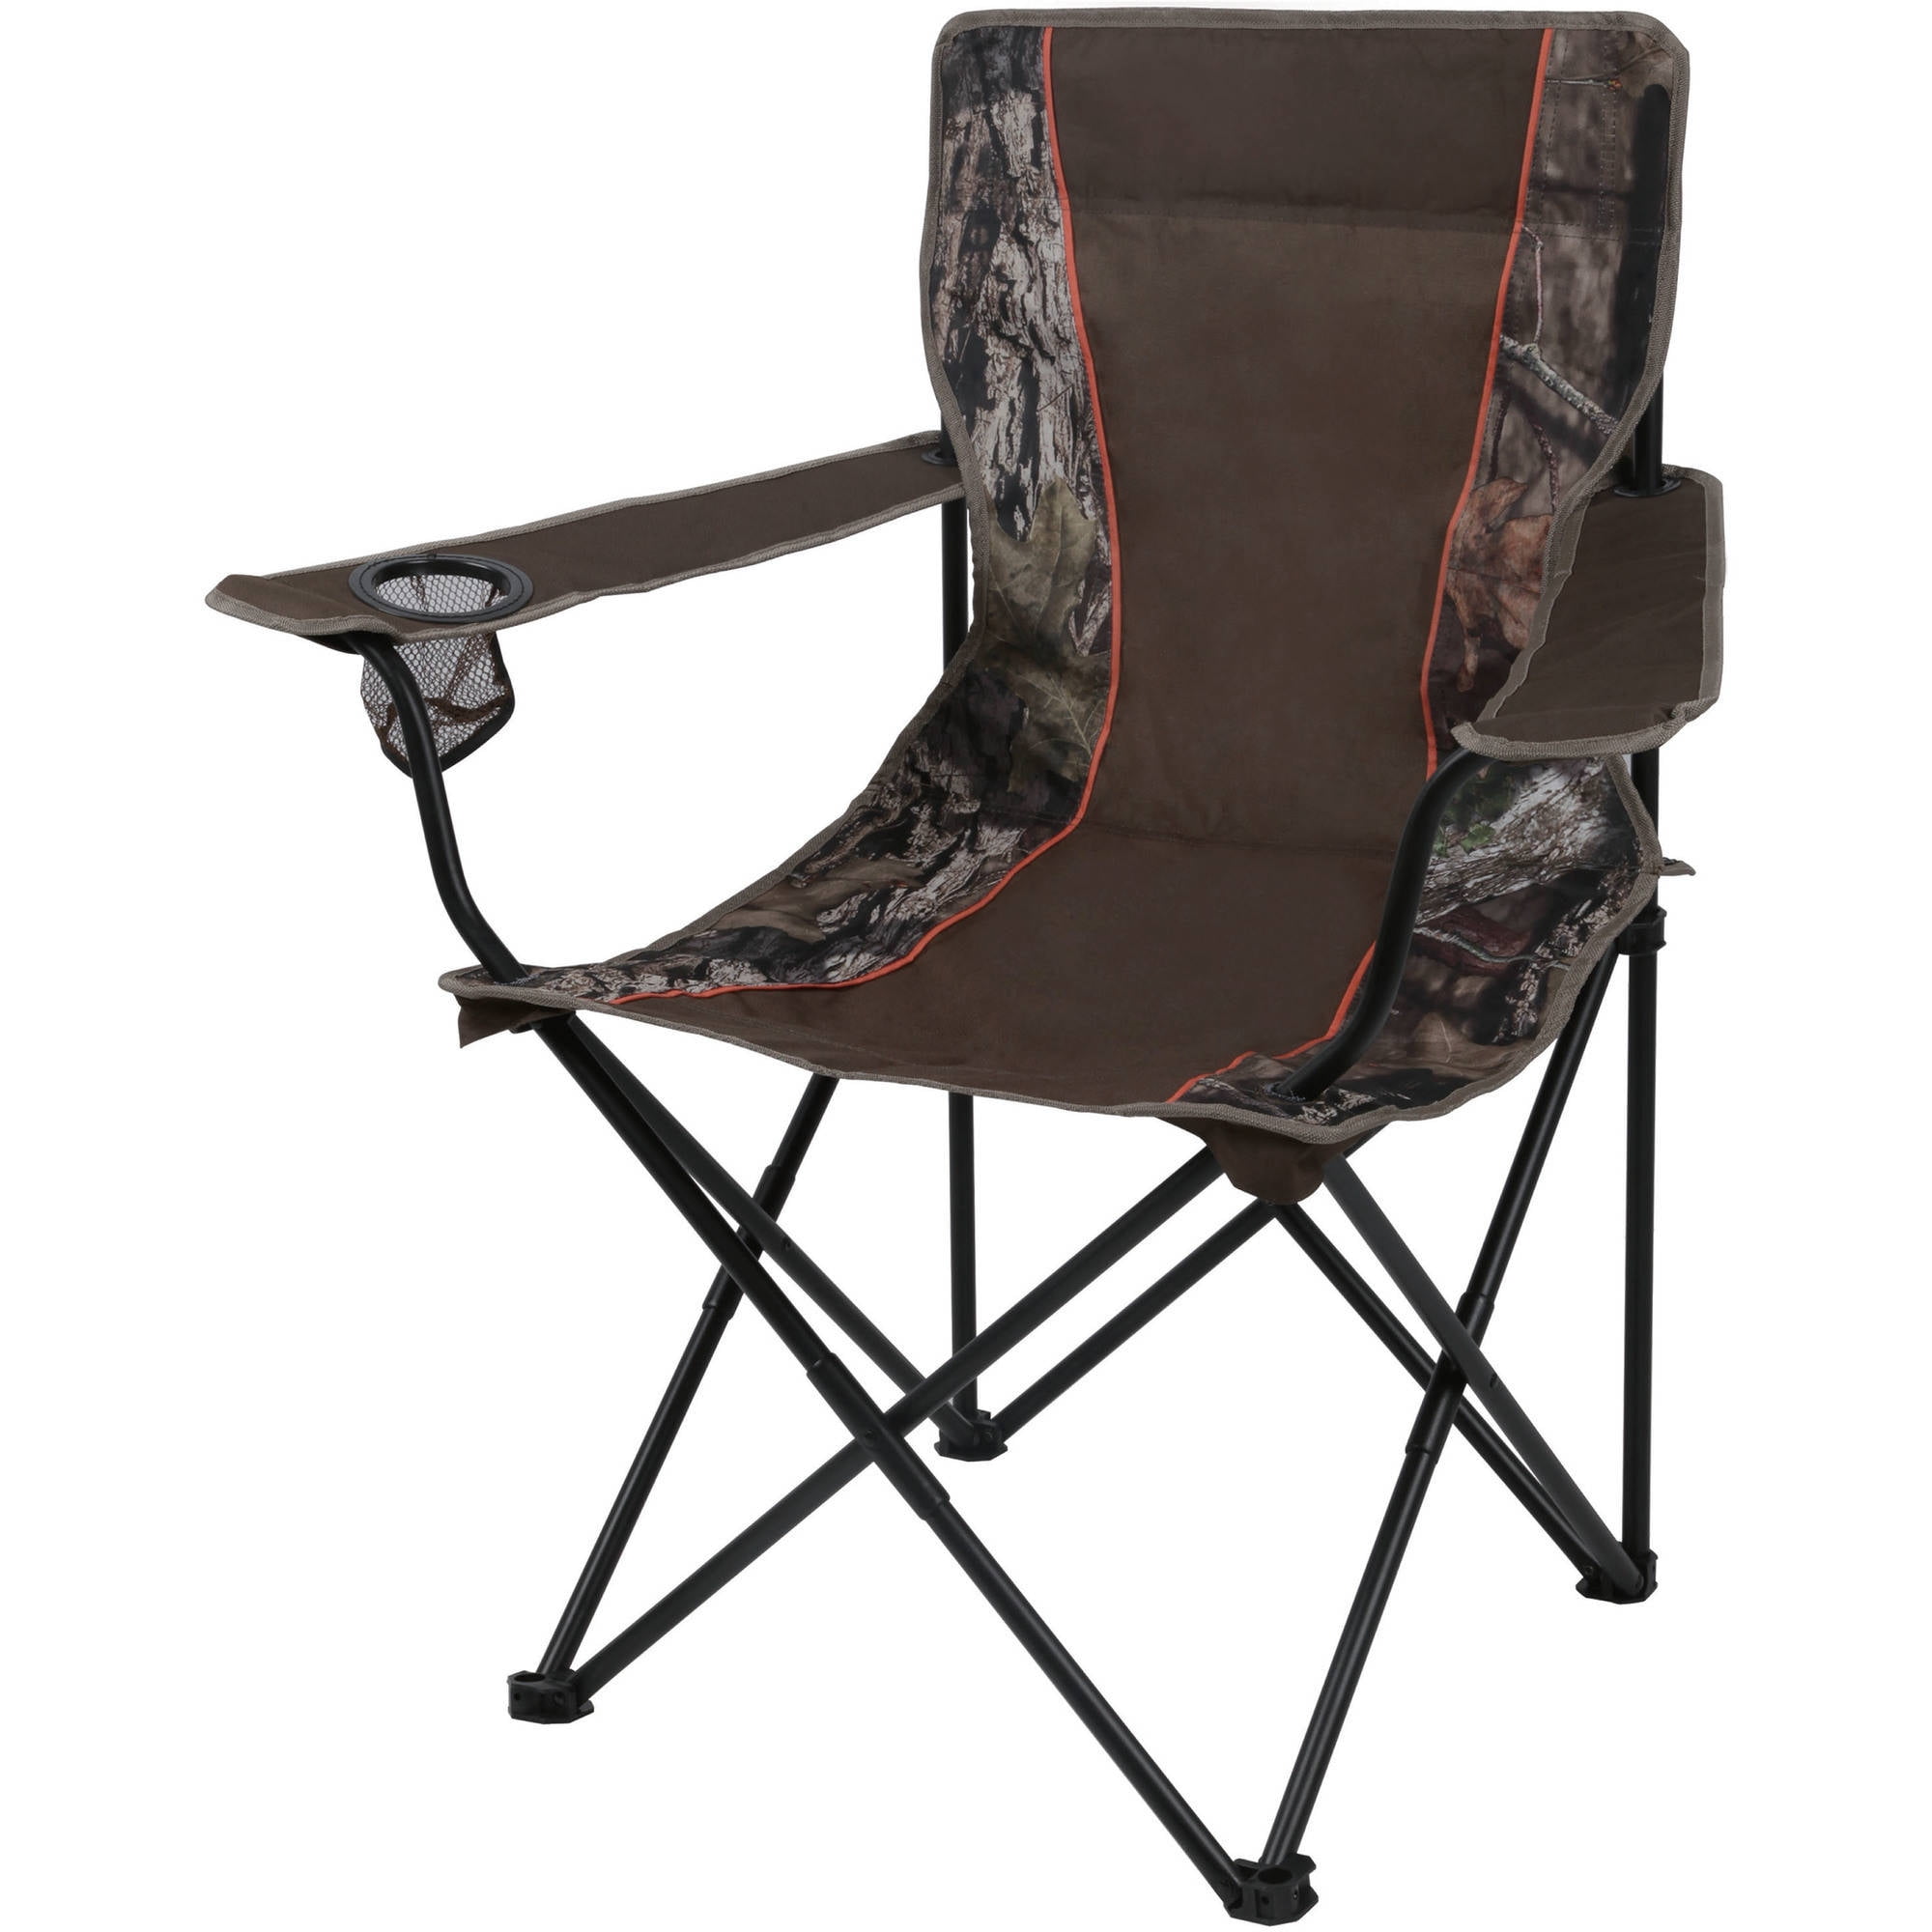 Camping Chair Portable 500lbs Camo Mossy Oak Outdoor Furniture Folding Seat New 